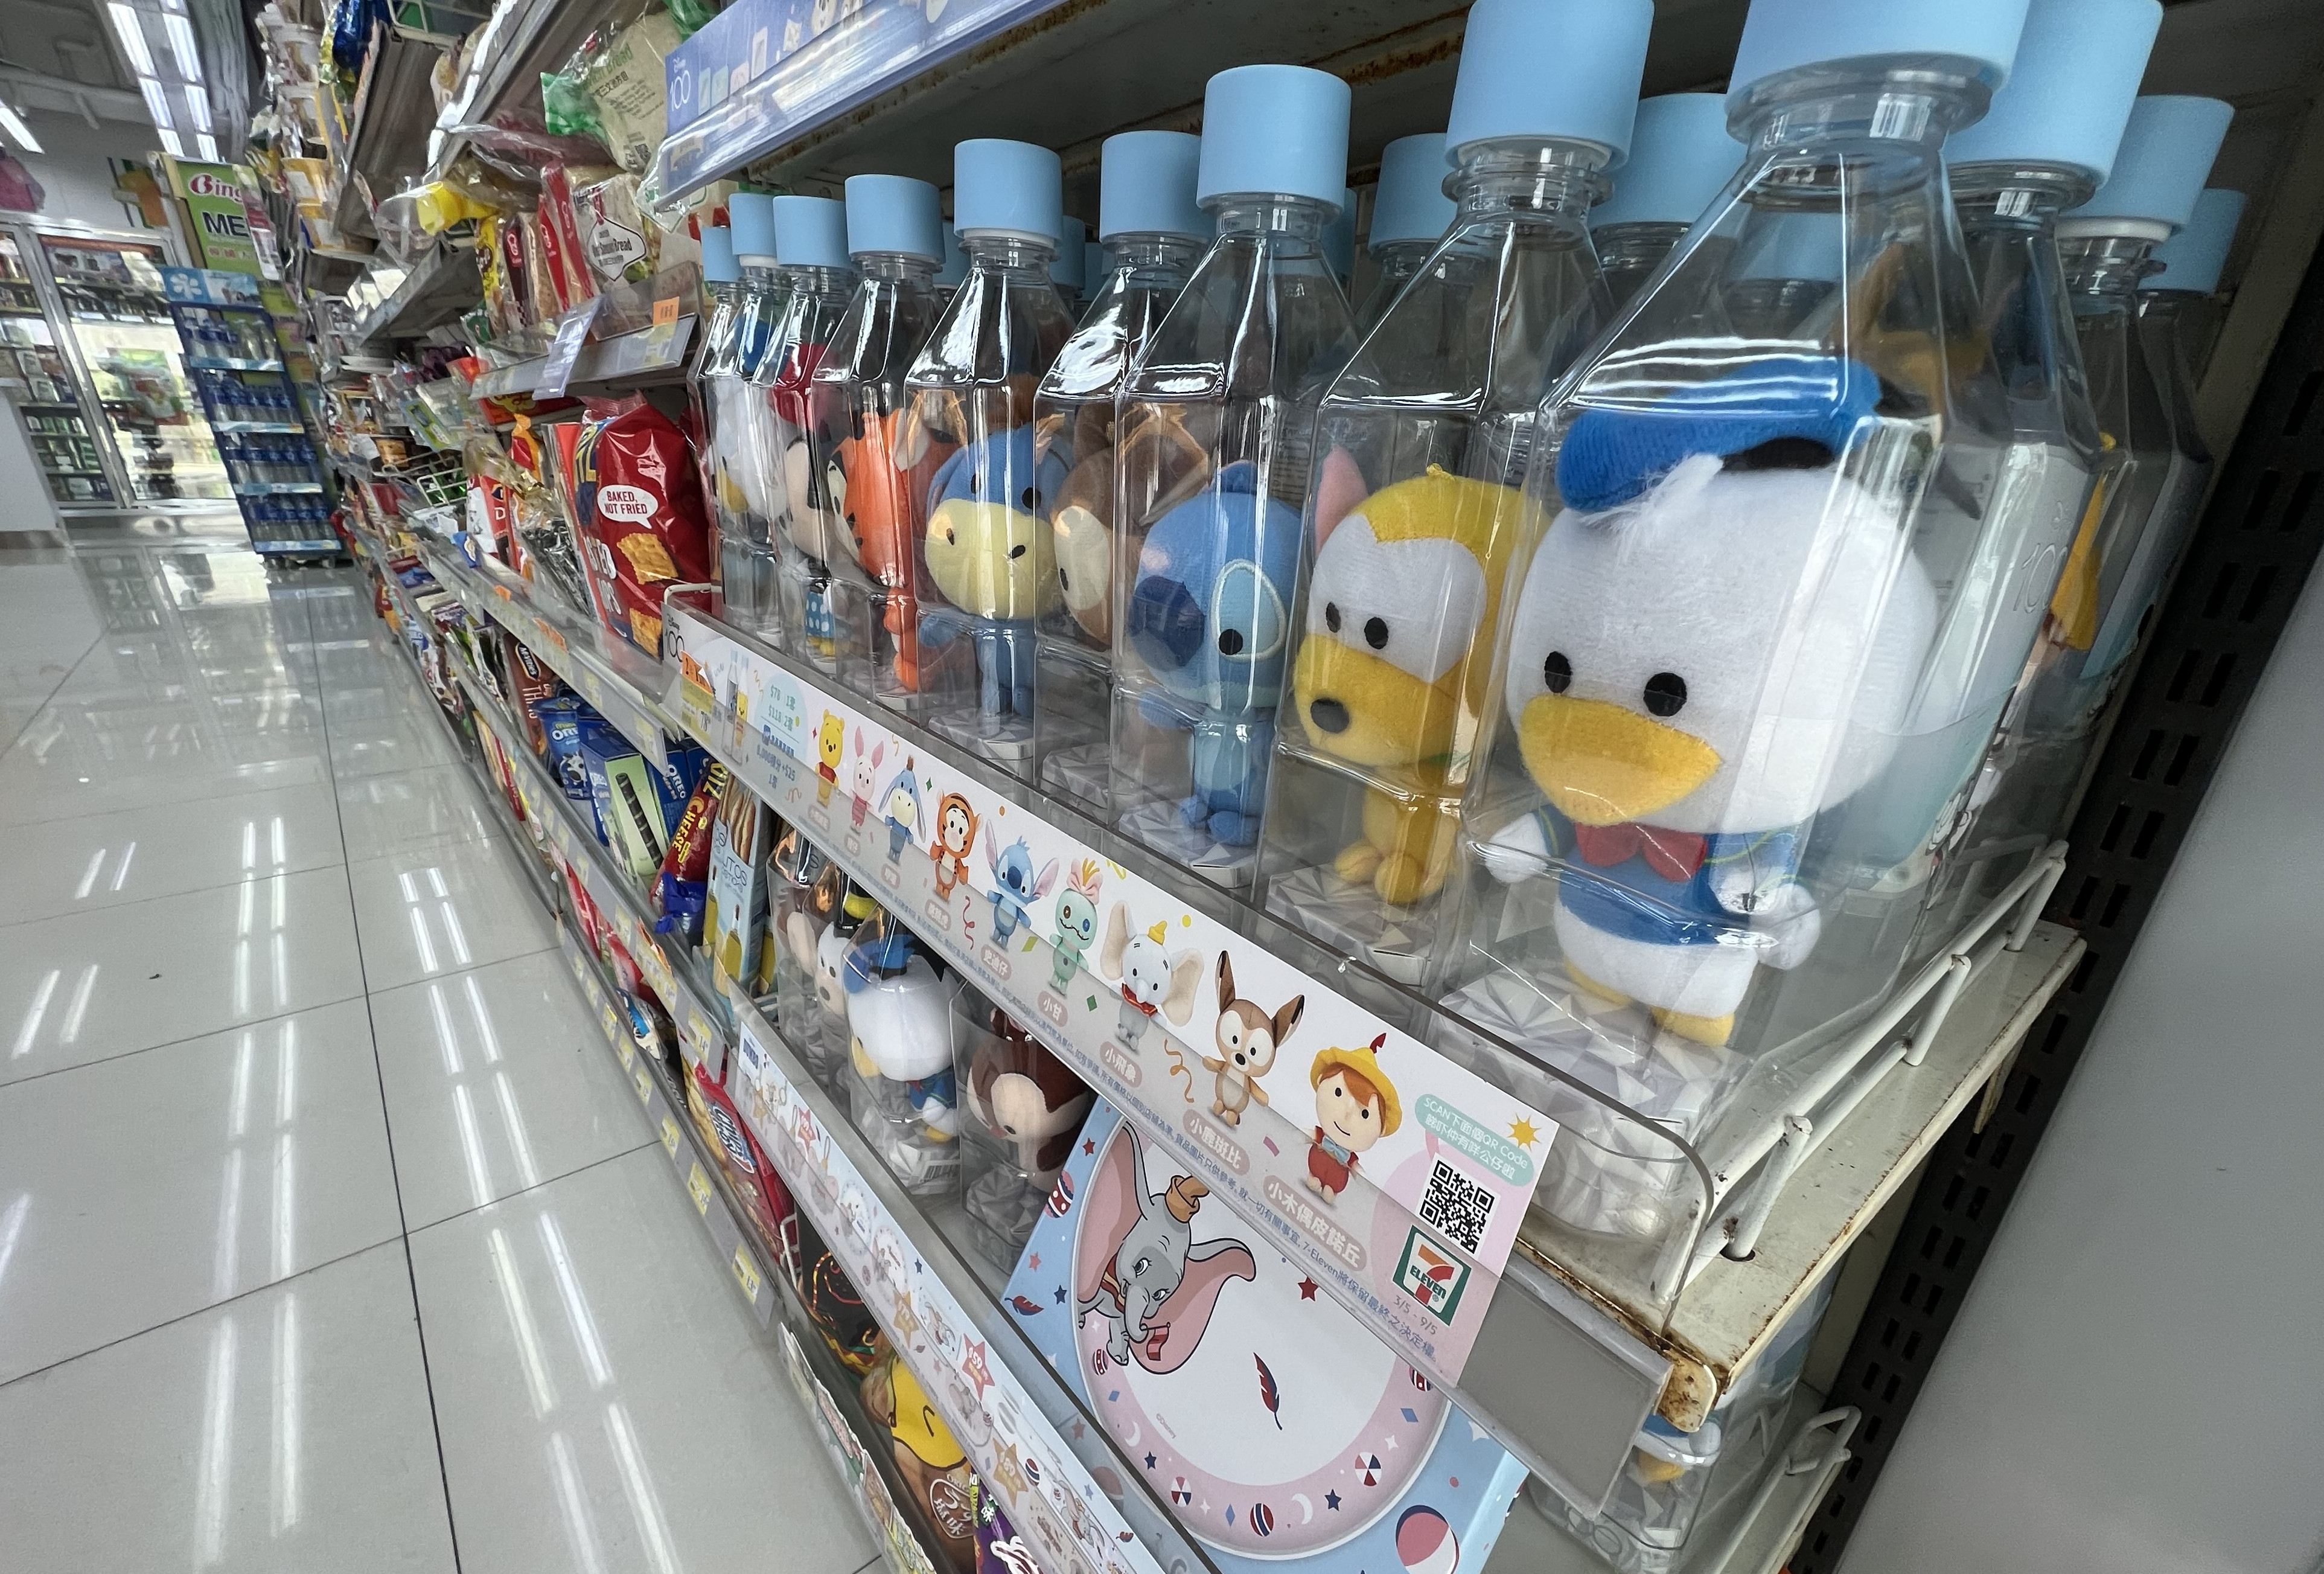 A new Disney product puts a plush toy in water bottles. Photo: Martin Chan